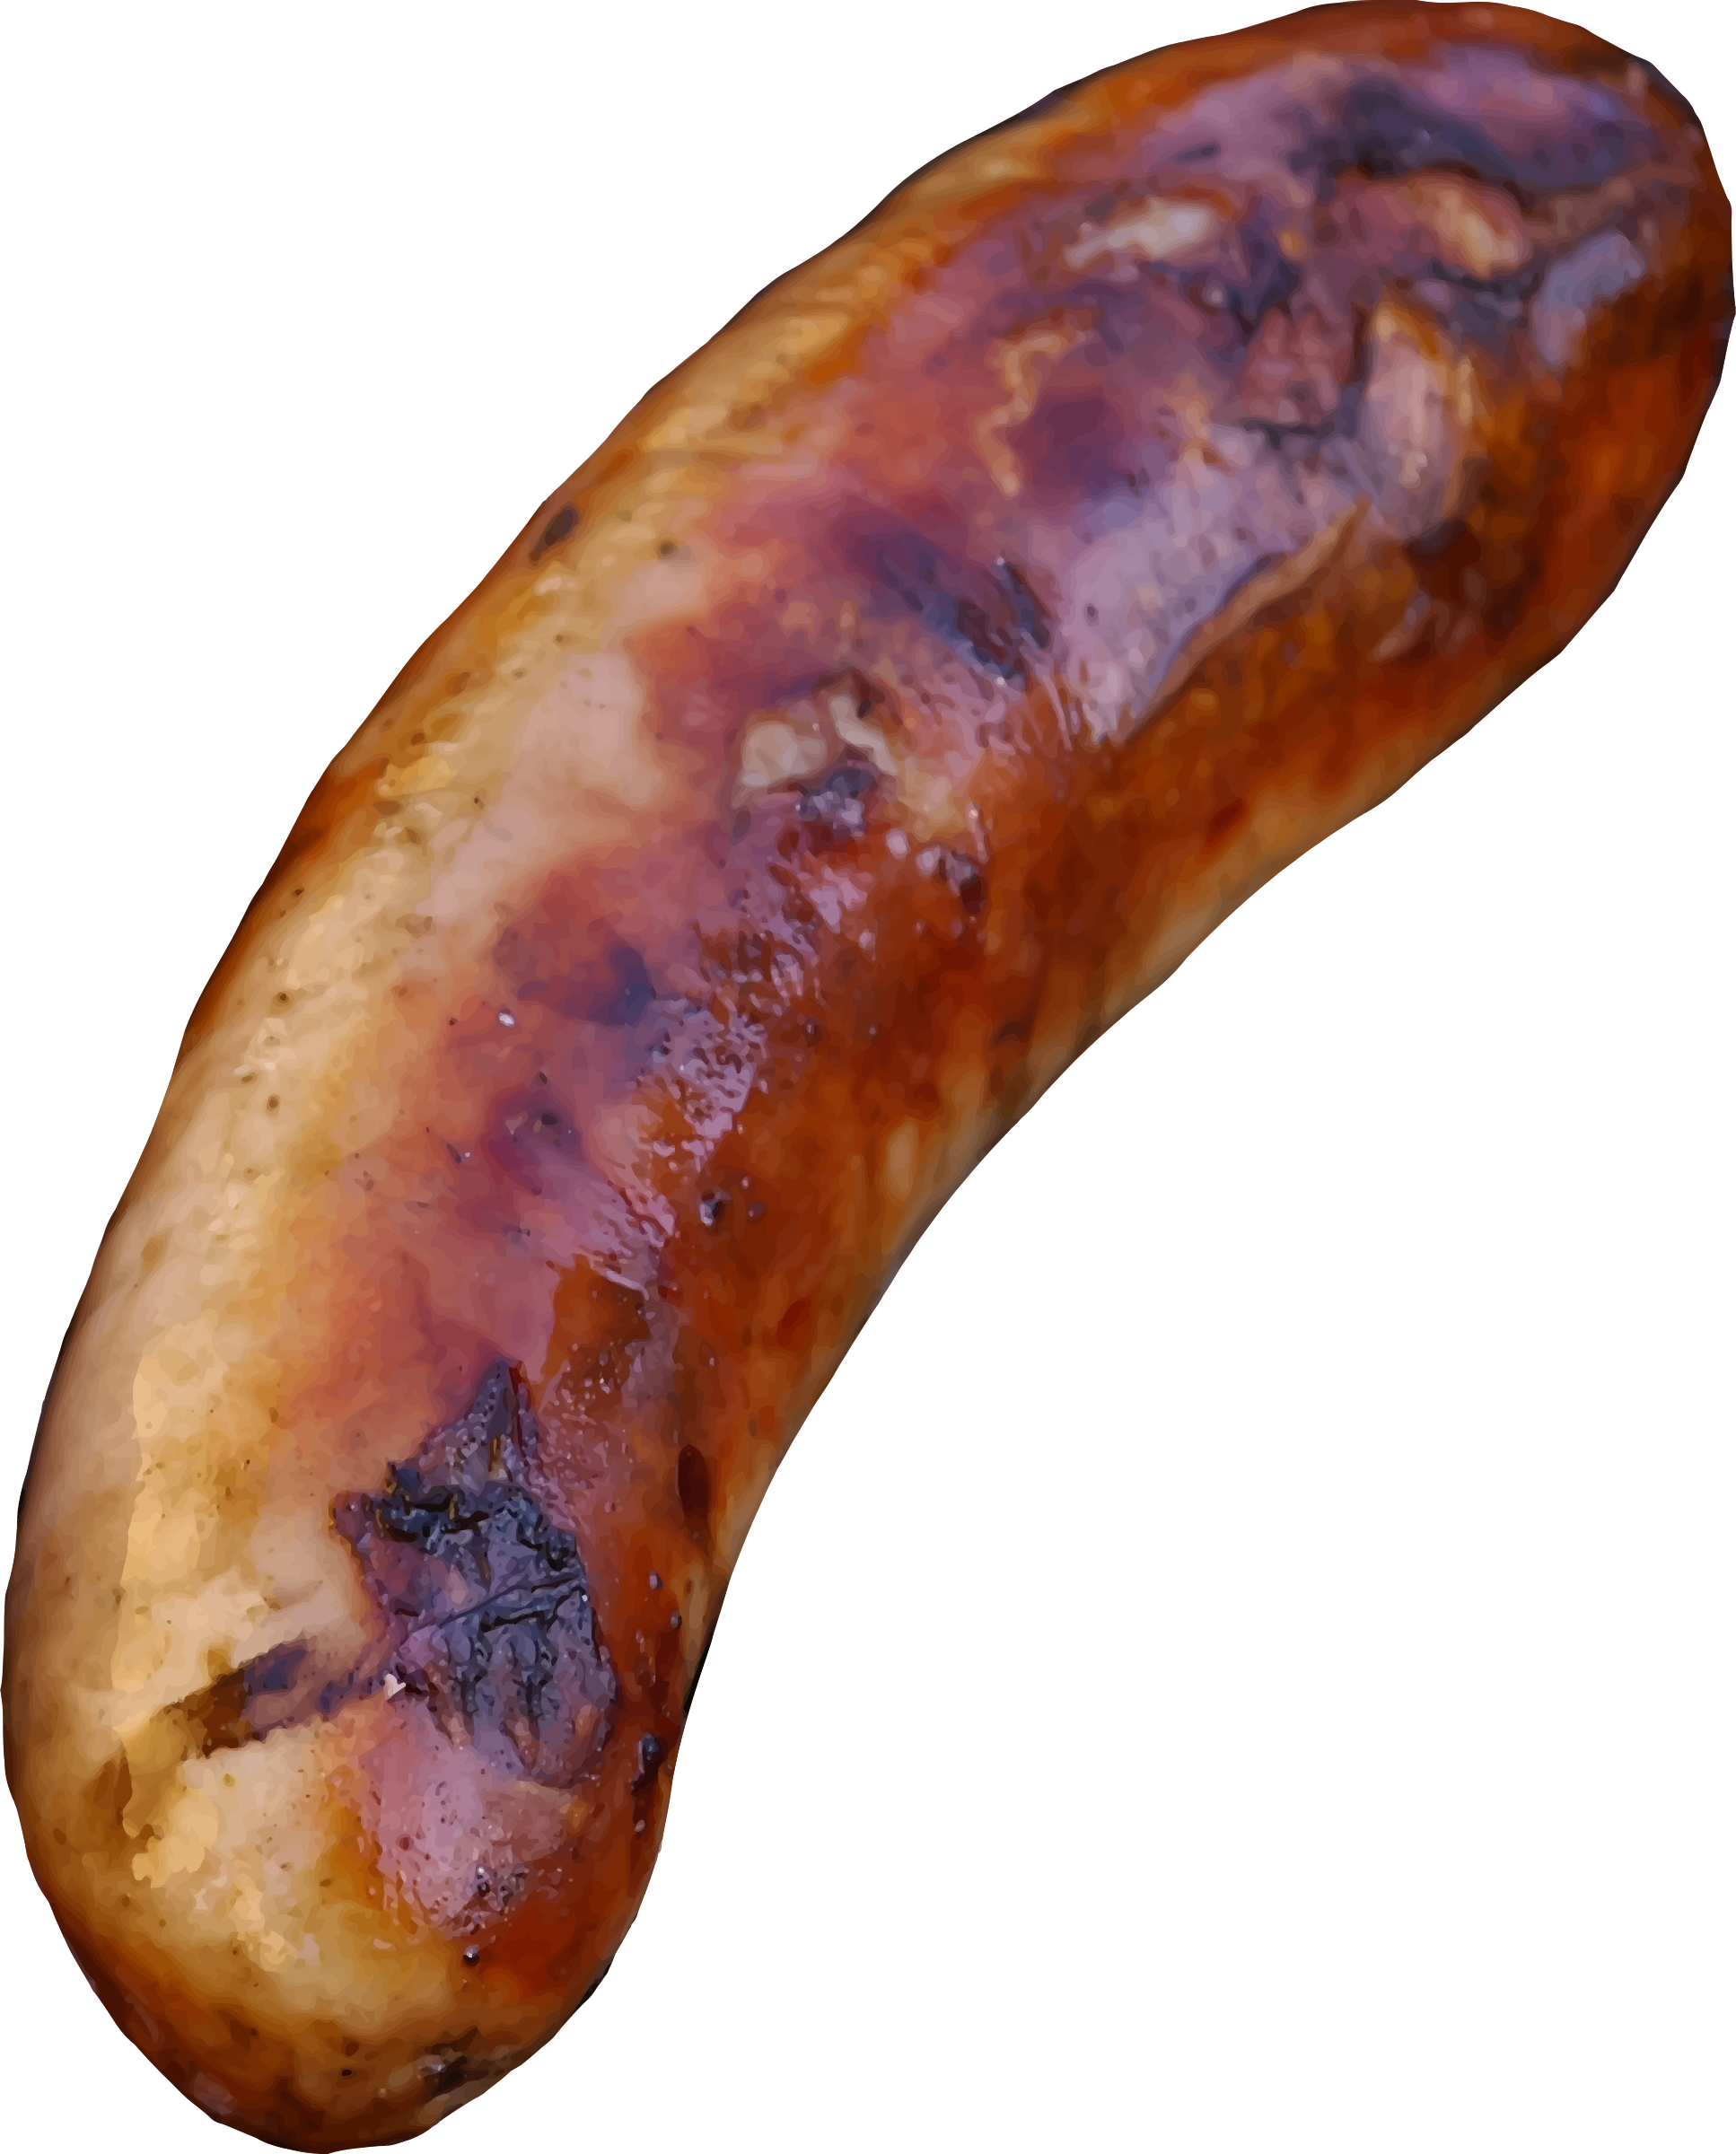 Sausage vector clipart image.